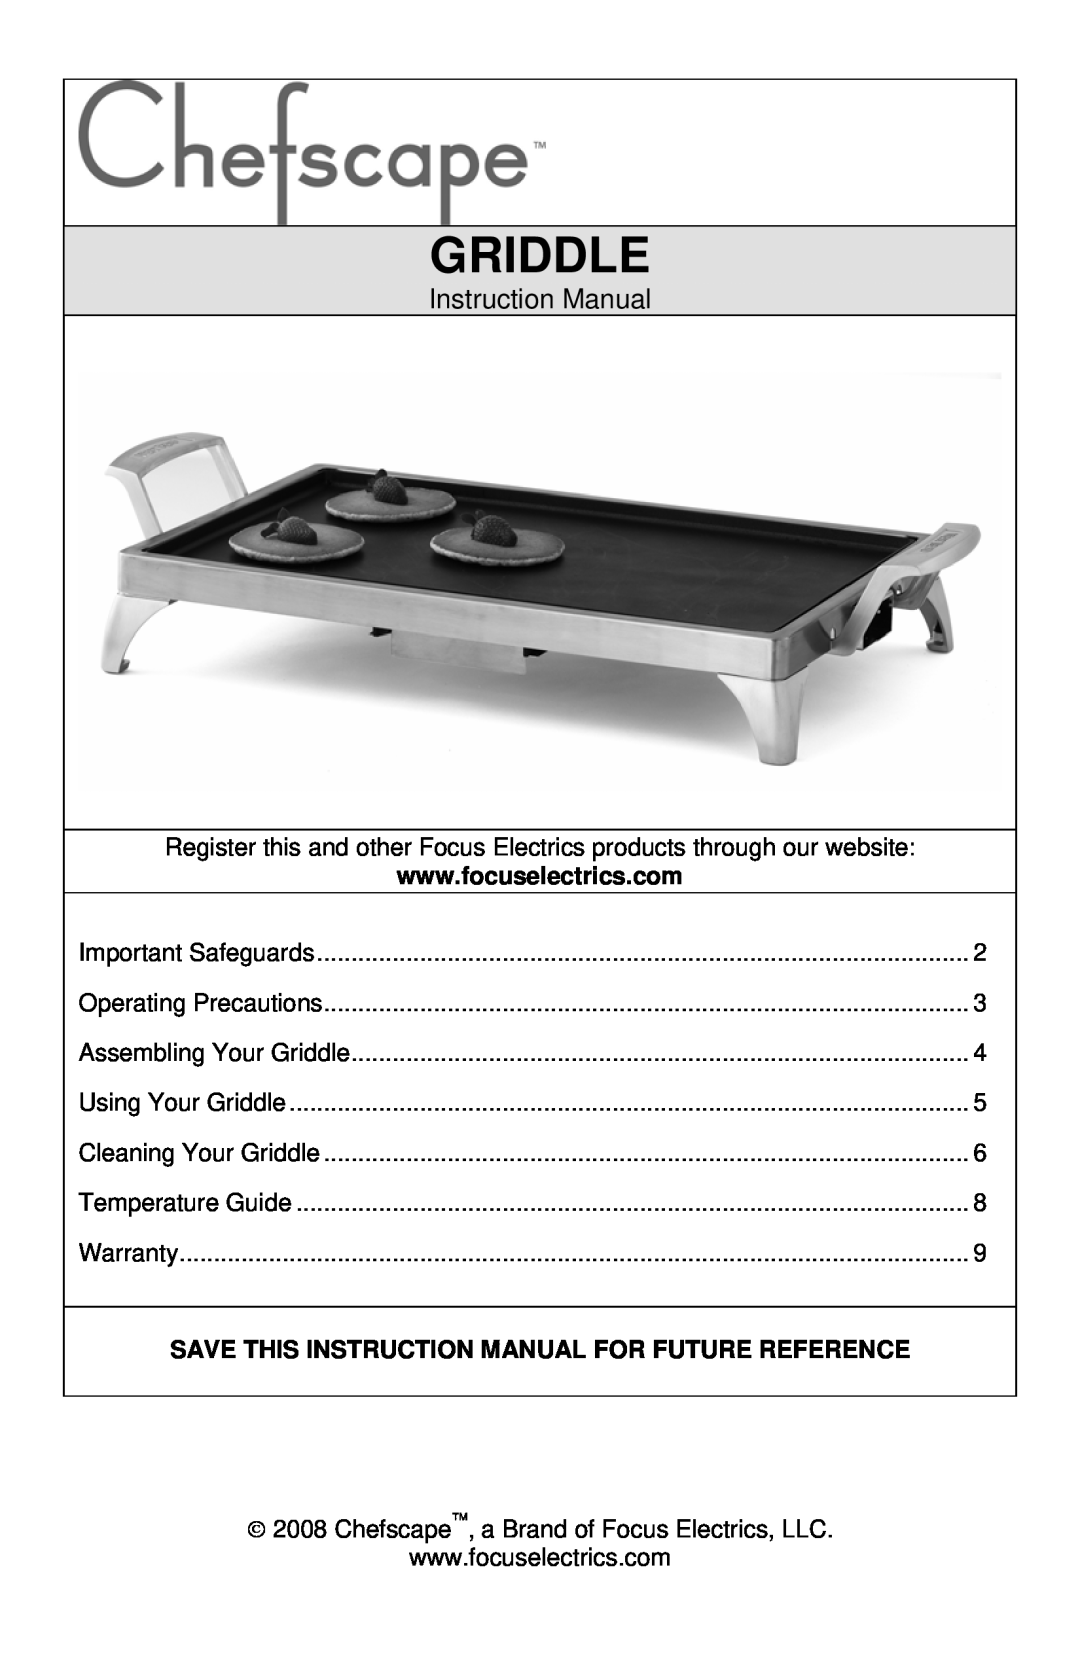 West Bend L5749, PRGD900 instruction manual Griddle, Save This Instruction Manual For Future Reference 